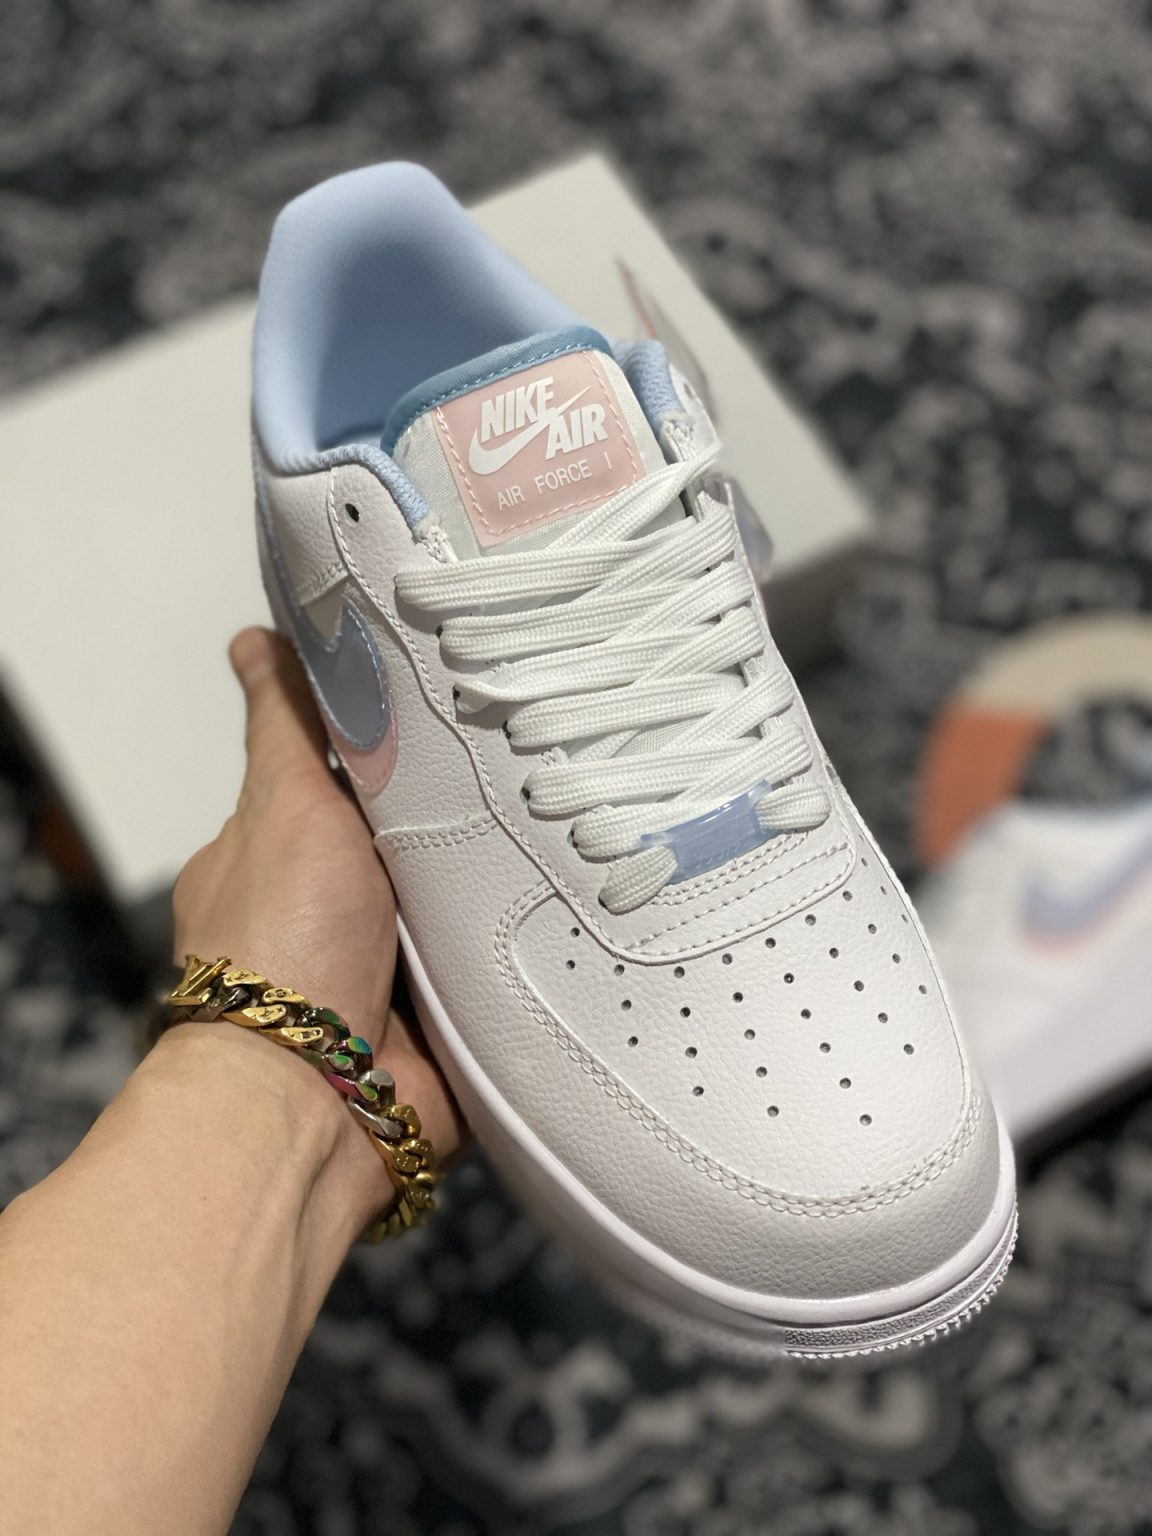 Nike Air Force 1 Low ‘Double Swoosh’ White/Light Armory Blue-Arctic